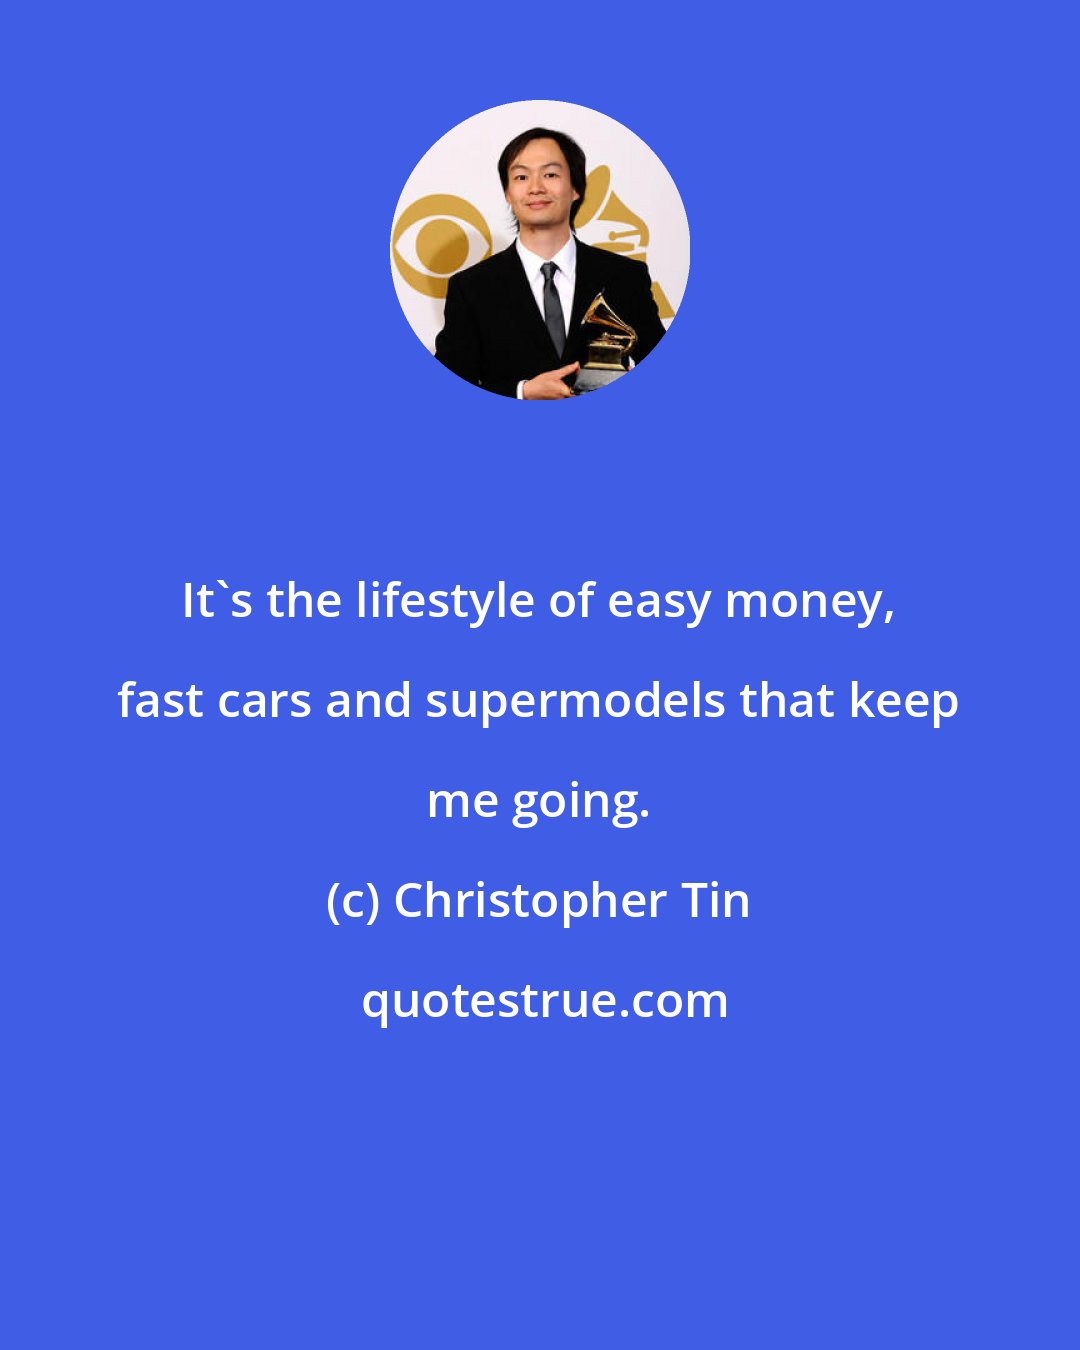 Christopher Tin: It's the lifestyle of easy money, fast cars and supermodels that keep me going.